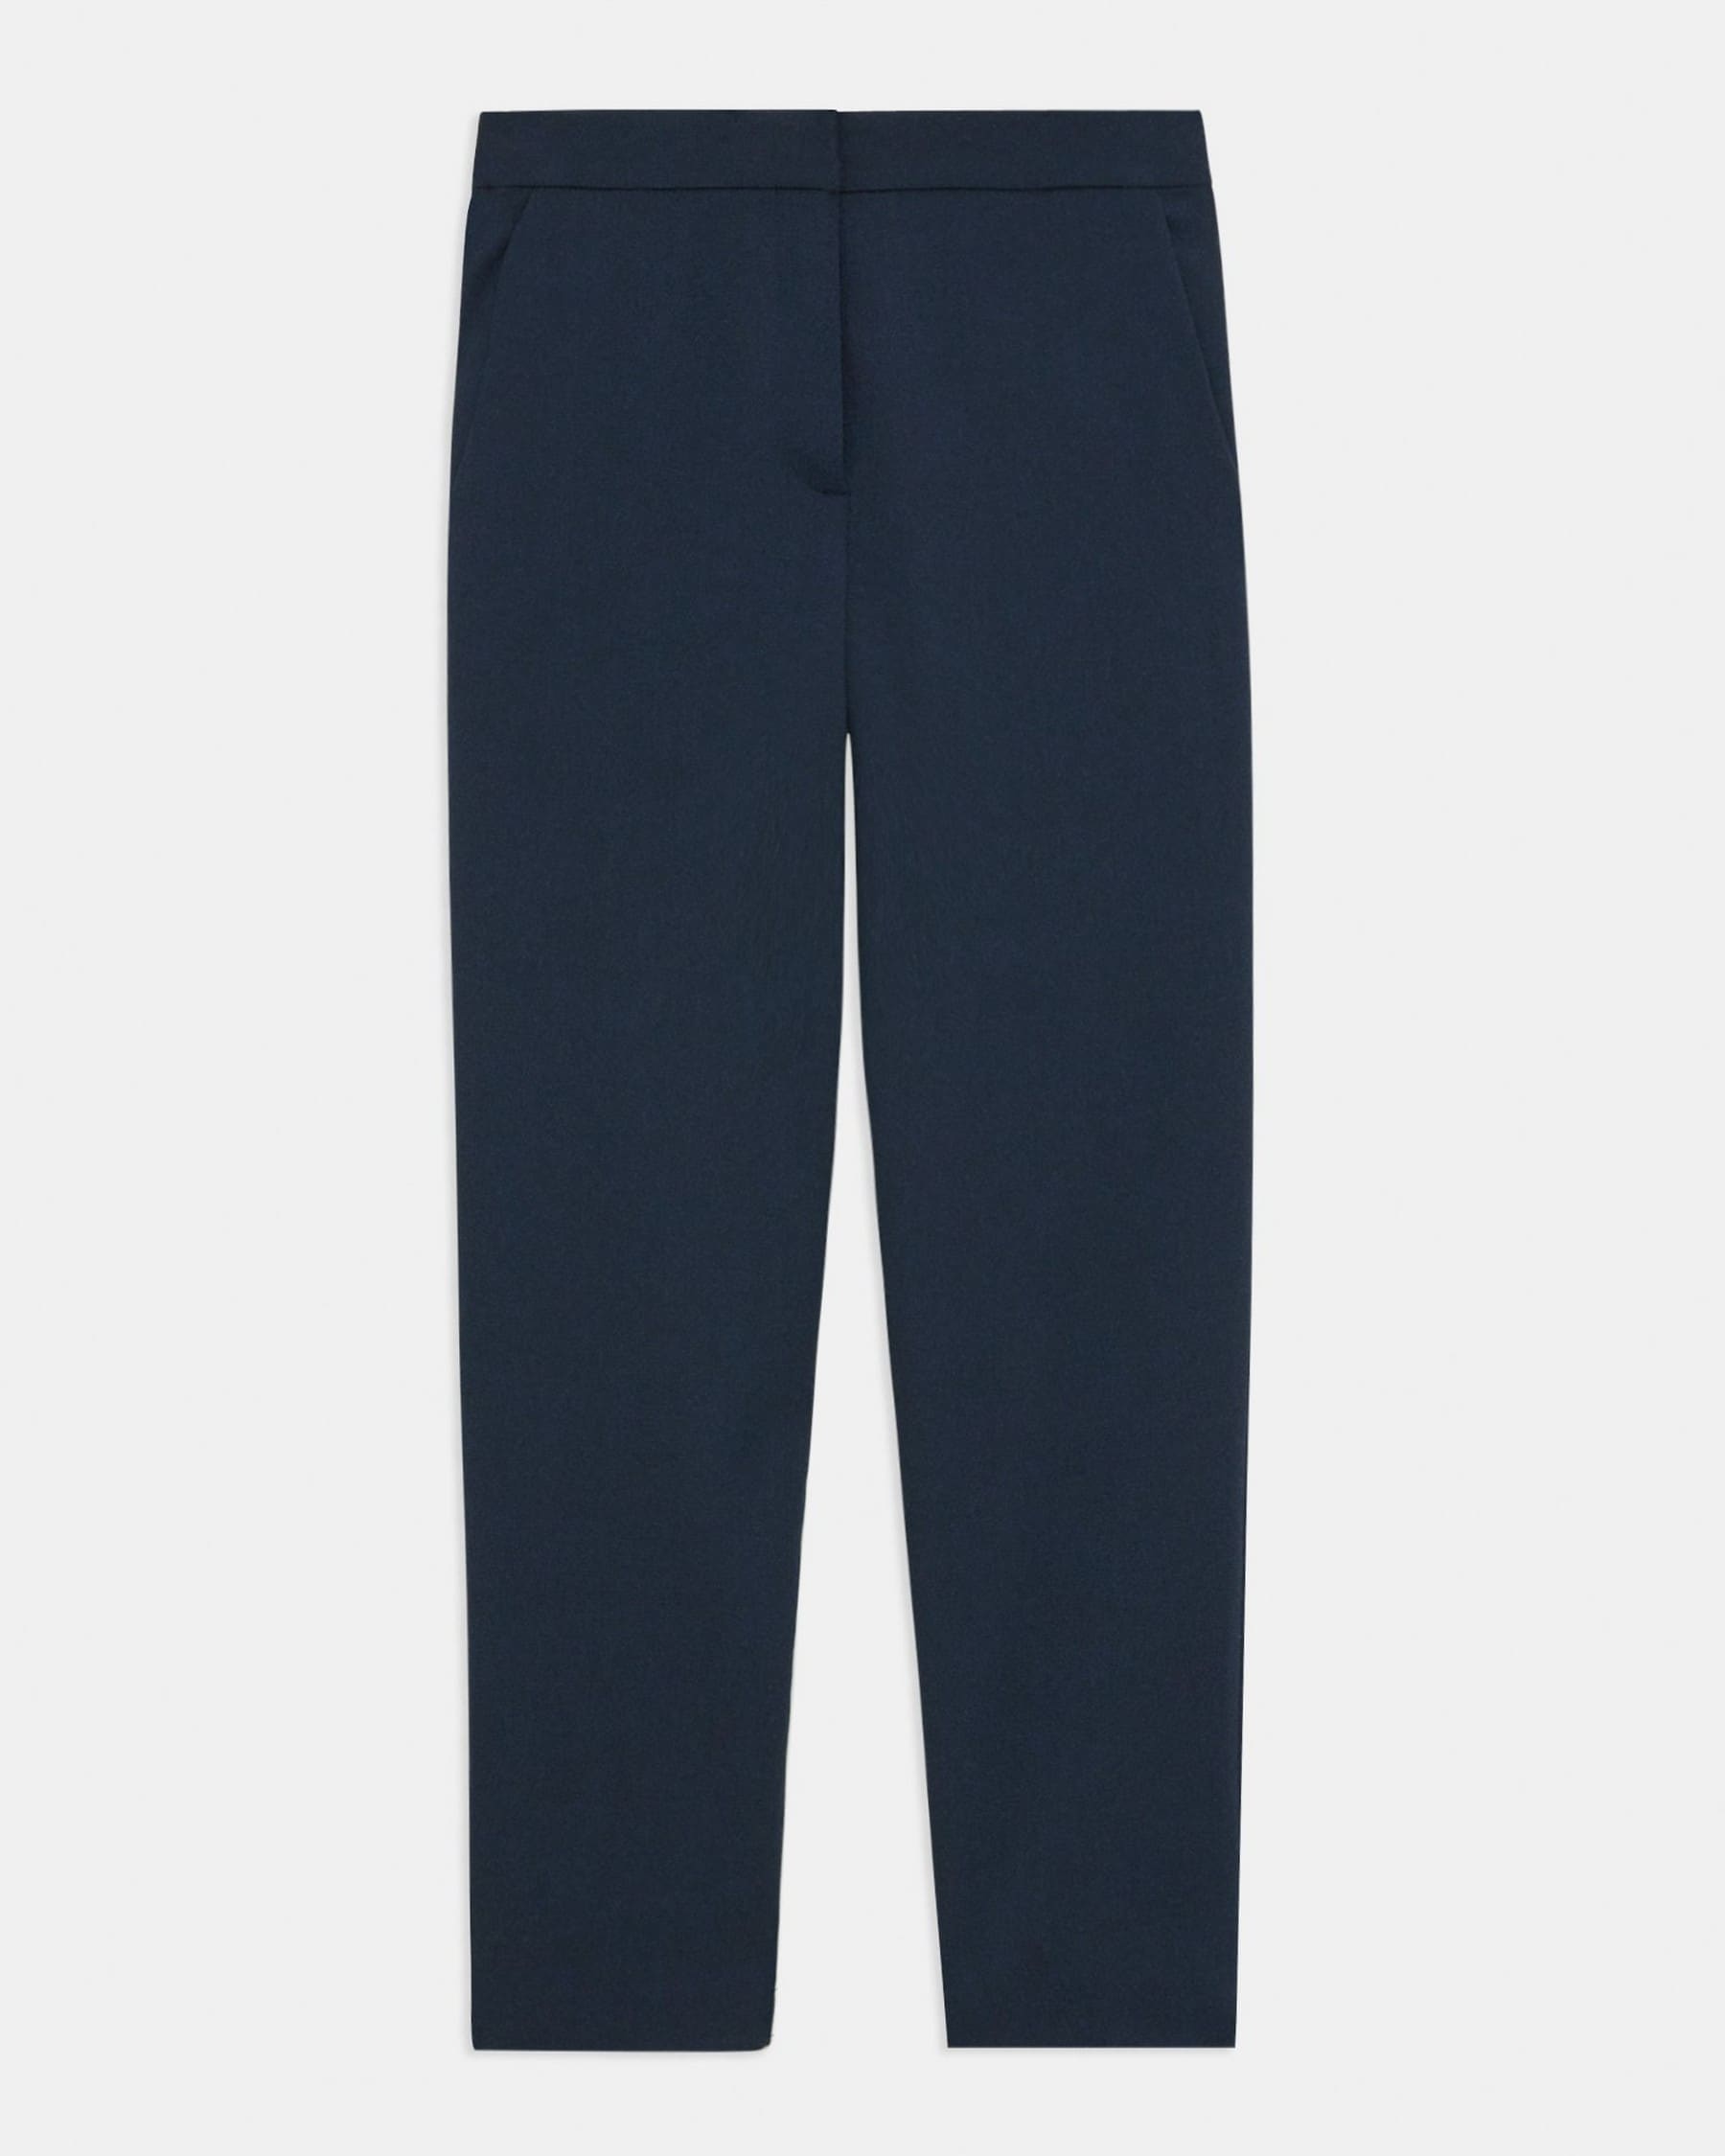 FITTED TROUSER